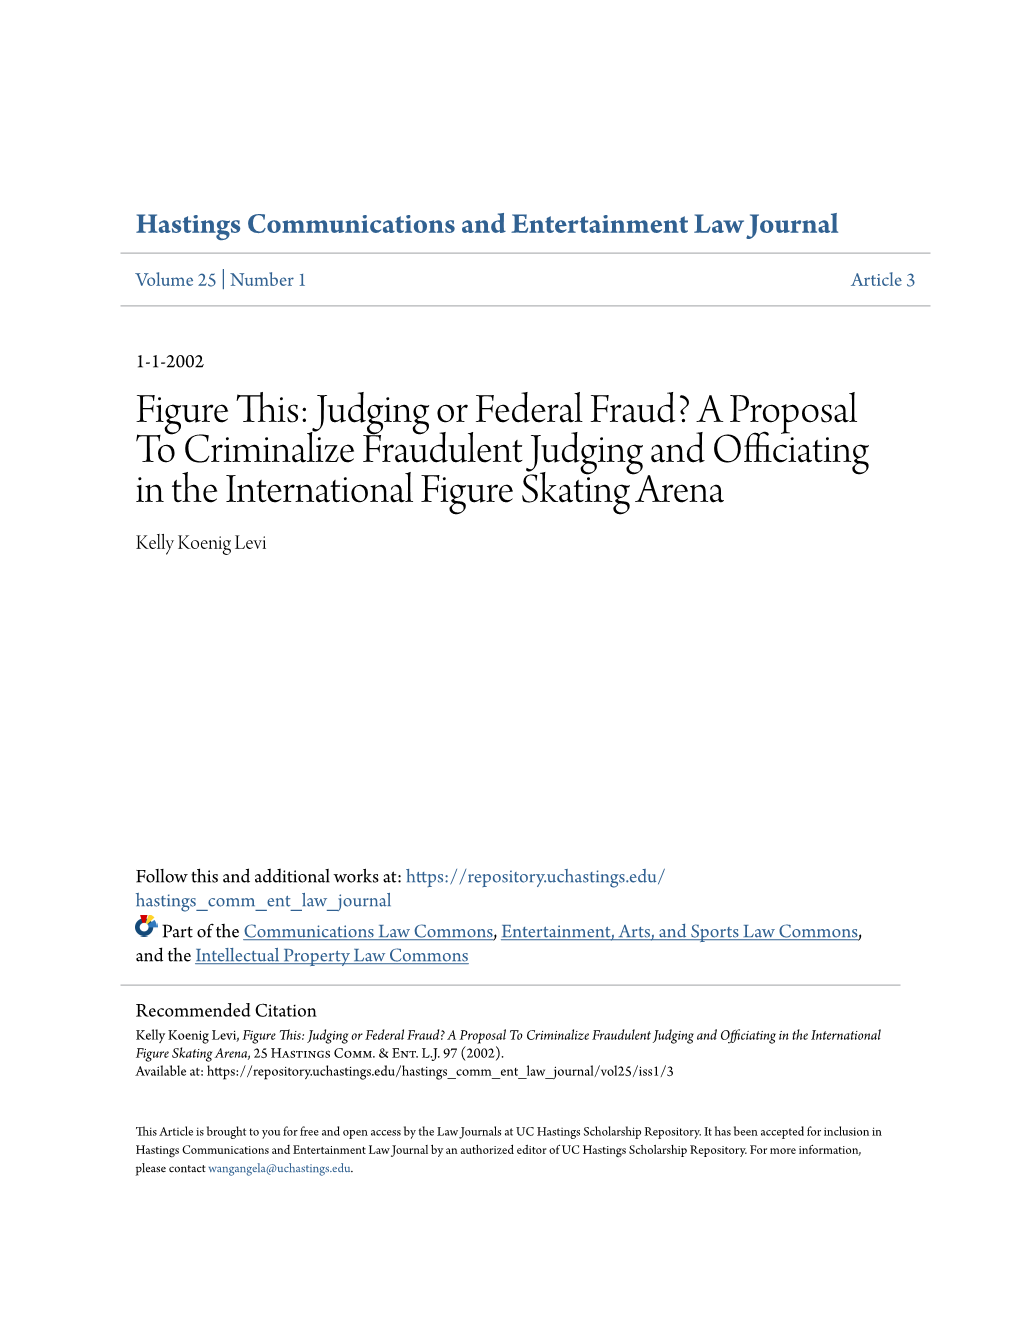 Figure This: Judging Or Federal Fraud? a Proposal to Criminalize Fraudulent Judging and Officiating in the International Figure Skating Arena Kelly Koenig Levi